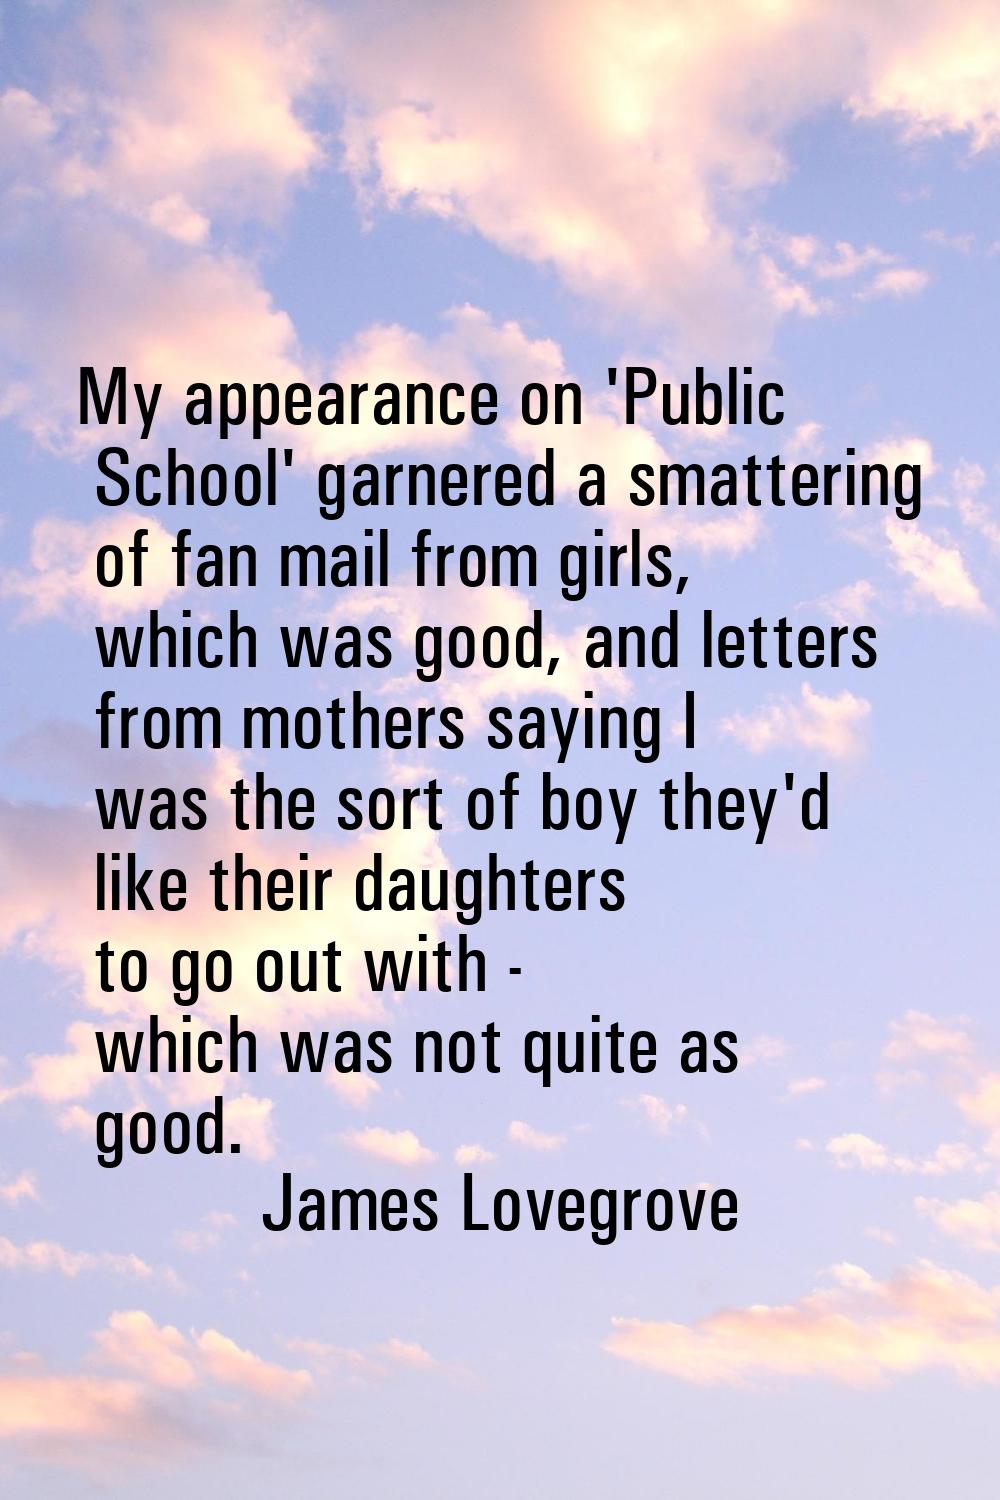 My appearance on 'Public School' garnered a smattering of fan mail from girls, which was good, and 